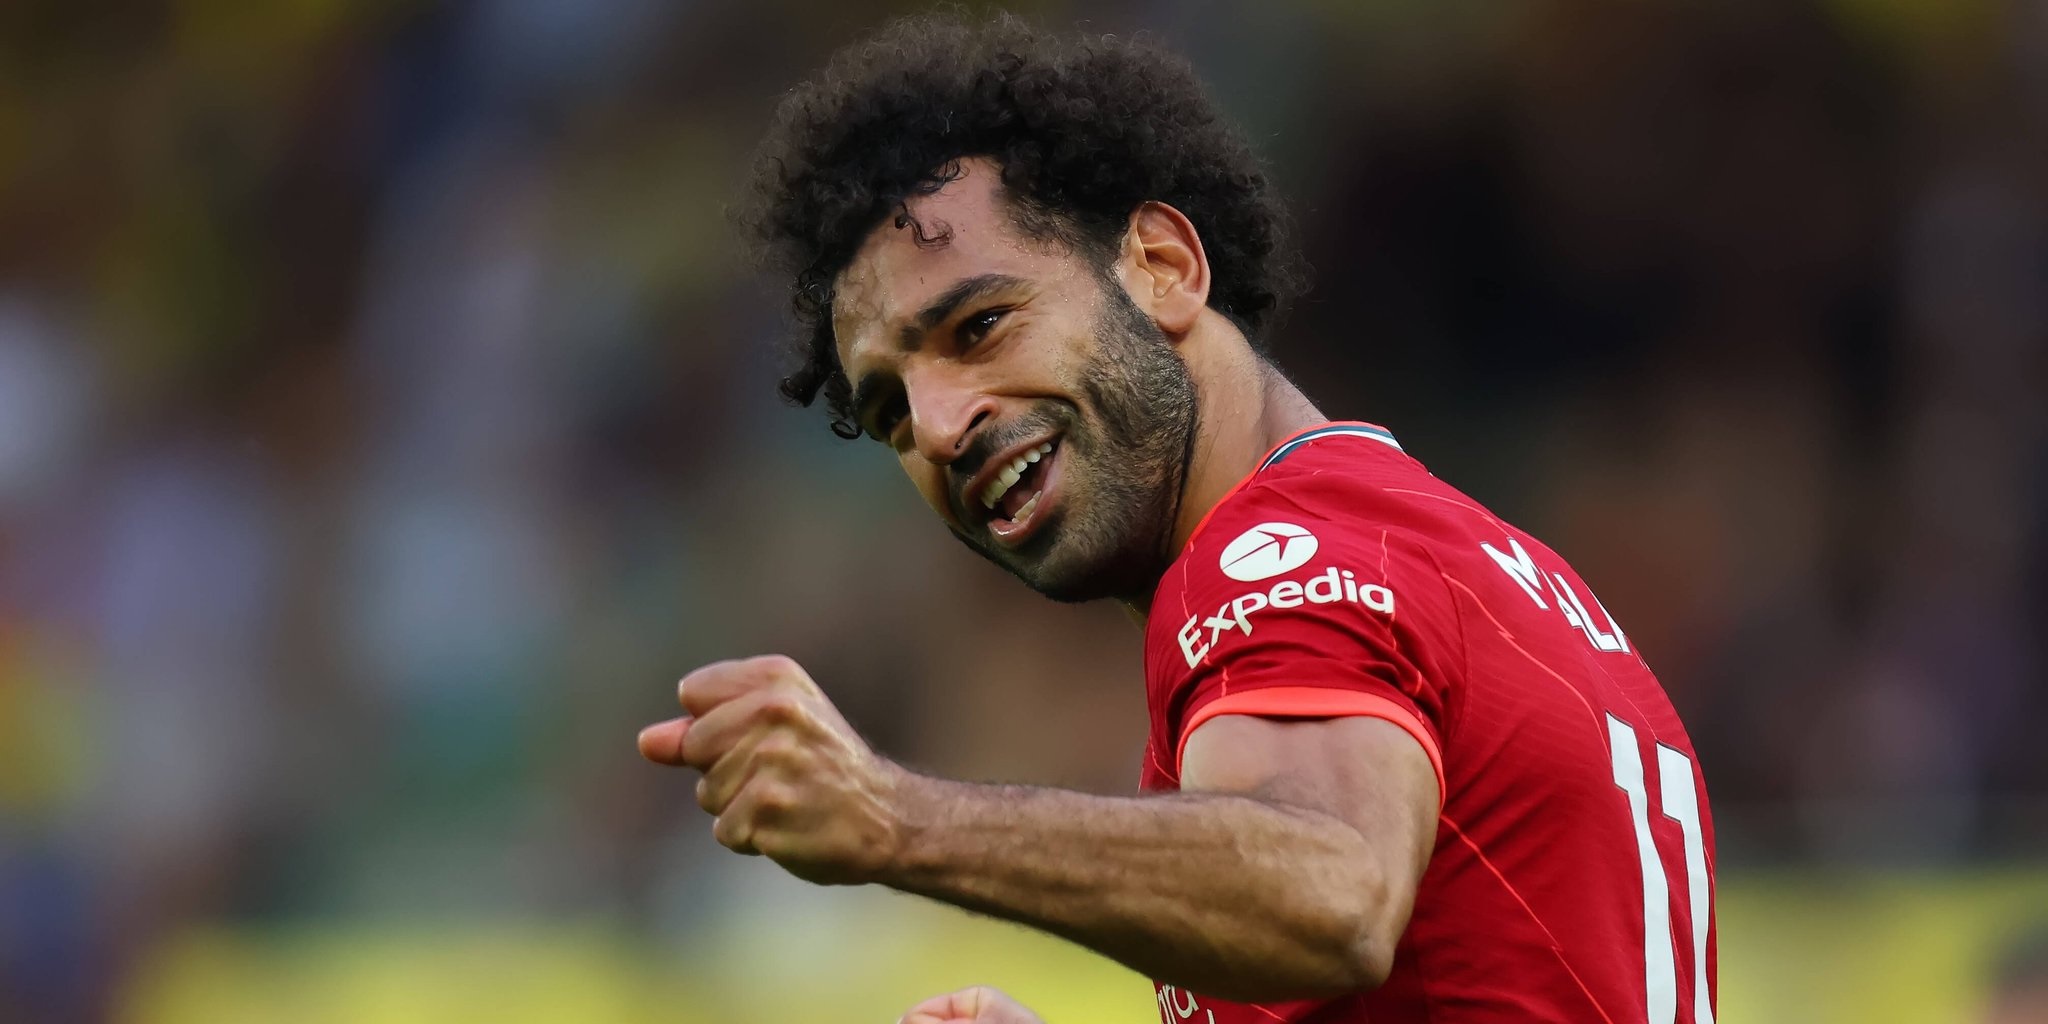 Negotiations underway: Liverpool ‘throwing the kitchen sink’ at new deal for Mo Salah